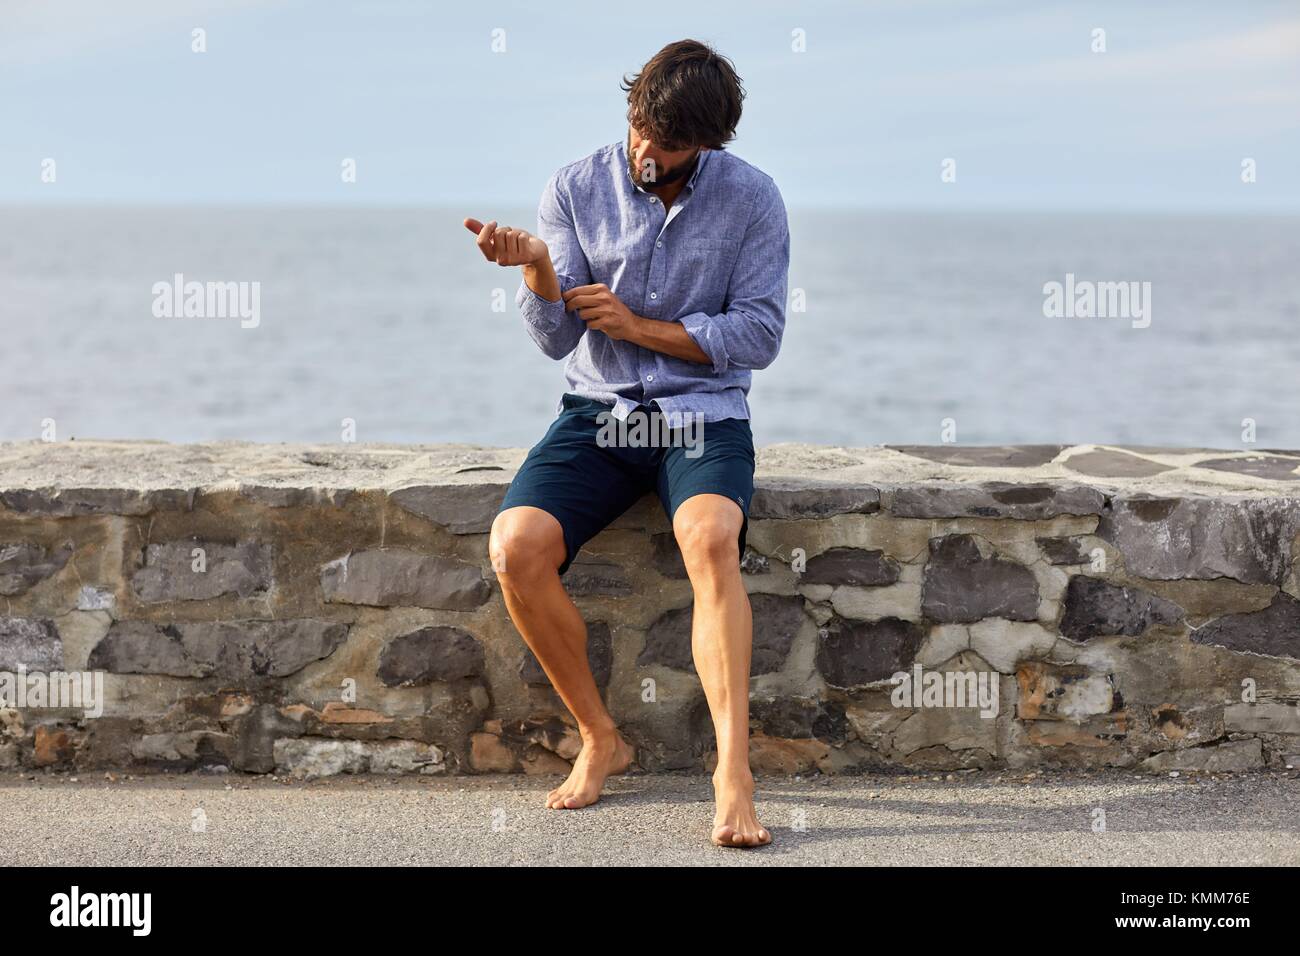 Young man, Port of Guethary, Aquitaine, Pyrenees Atlantiques, Basque Country, France, Europe Stock Photo